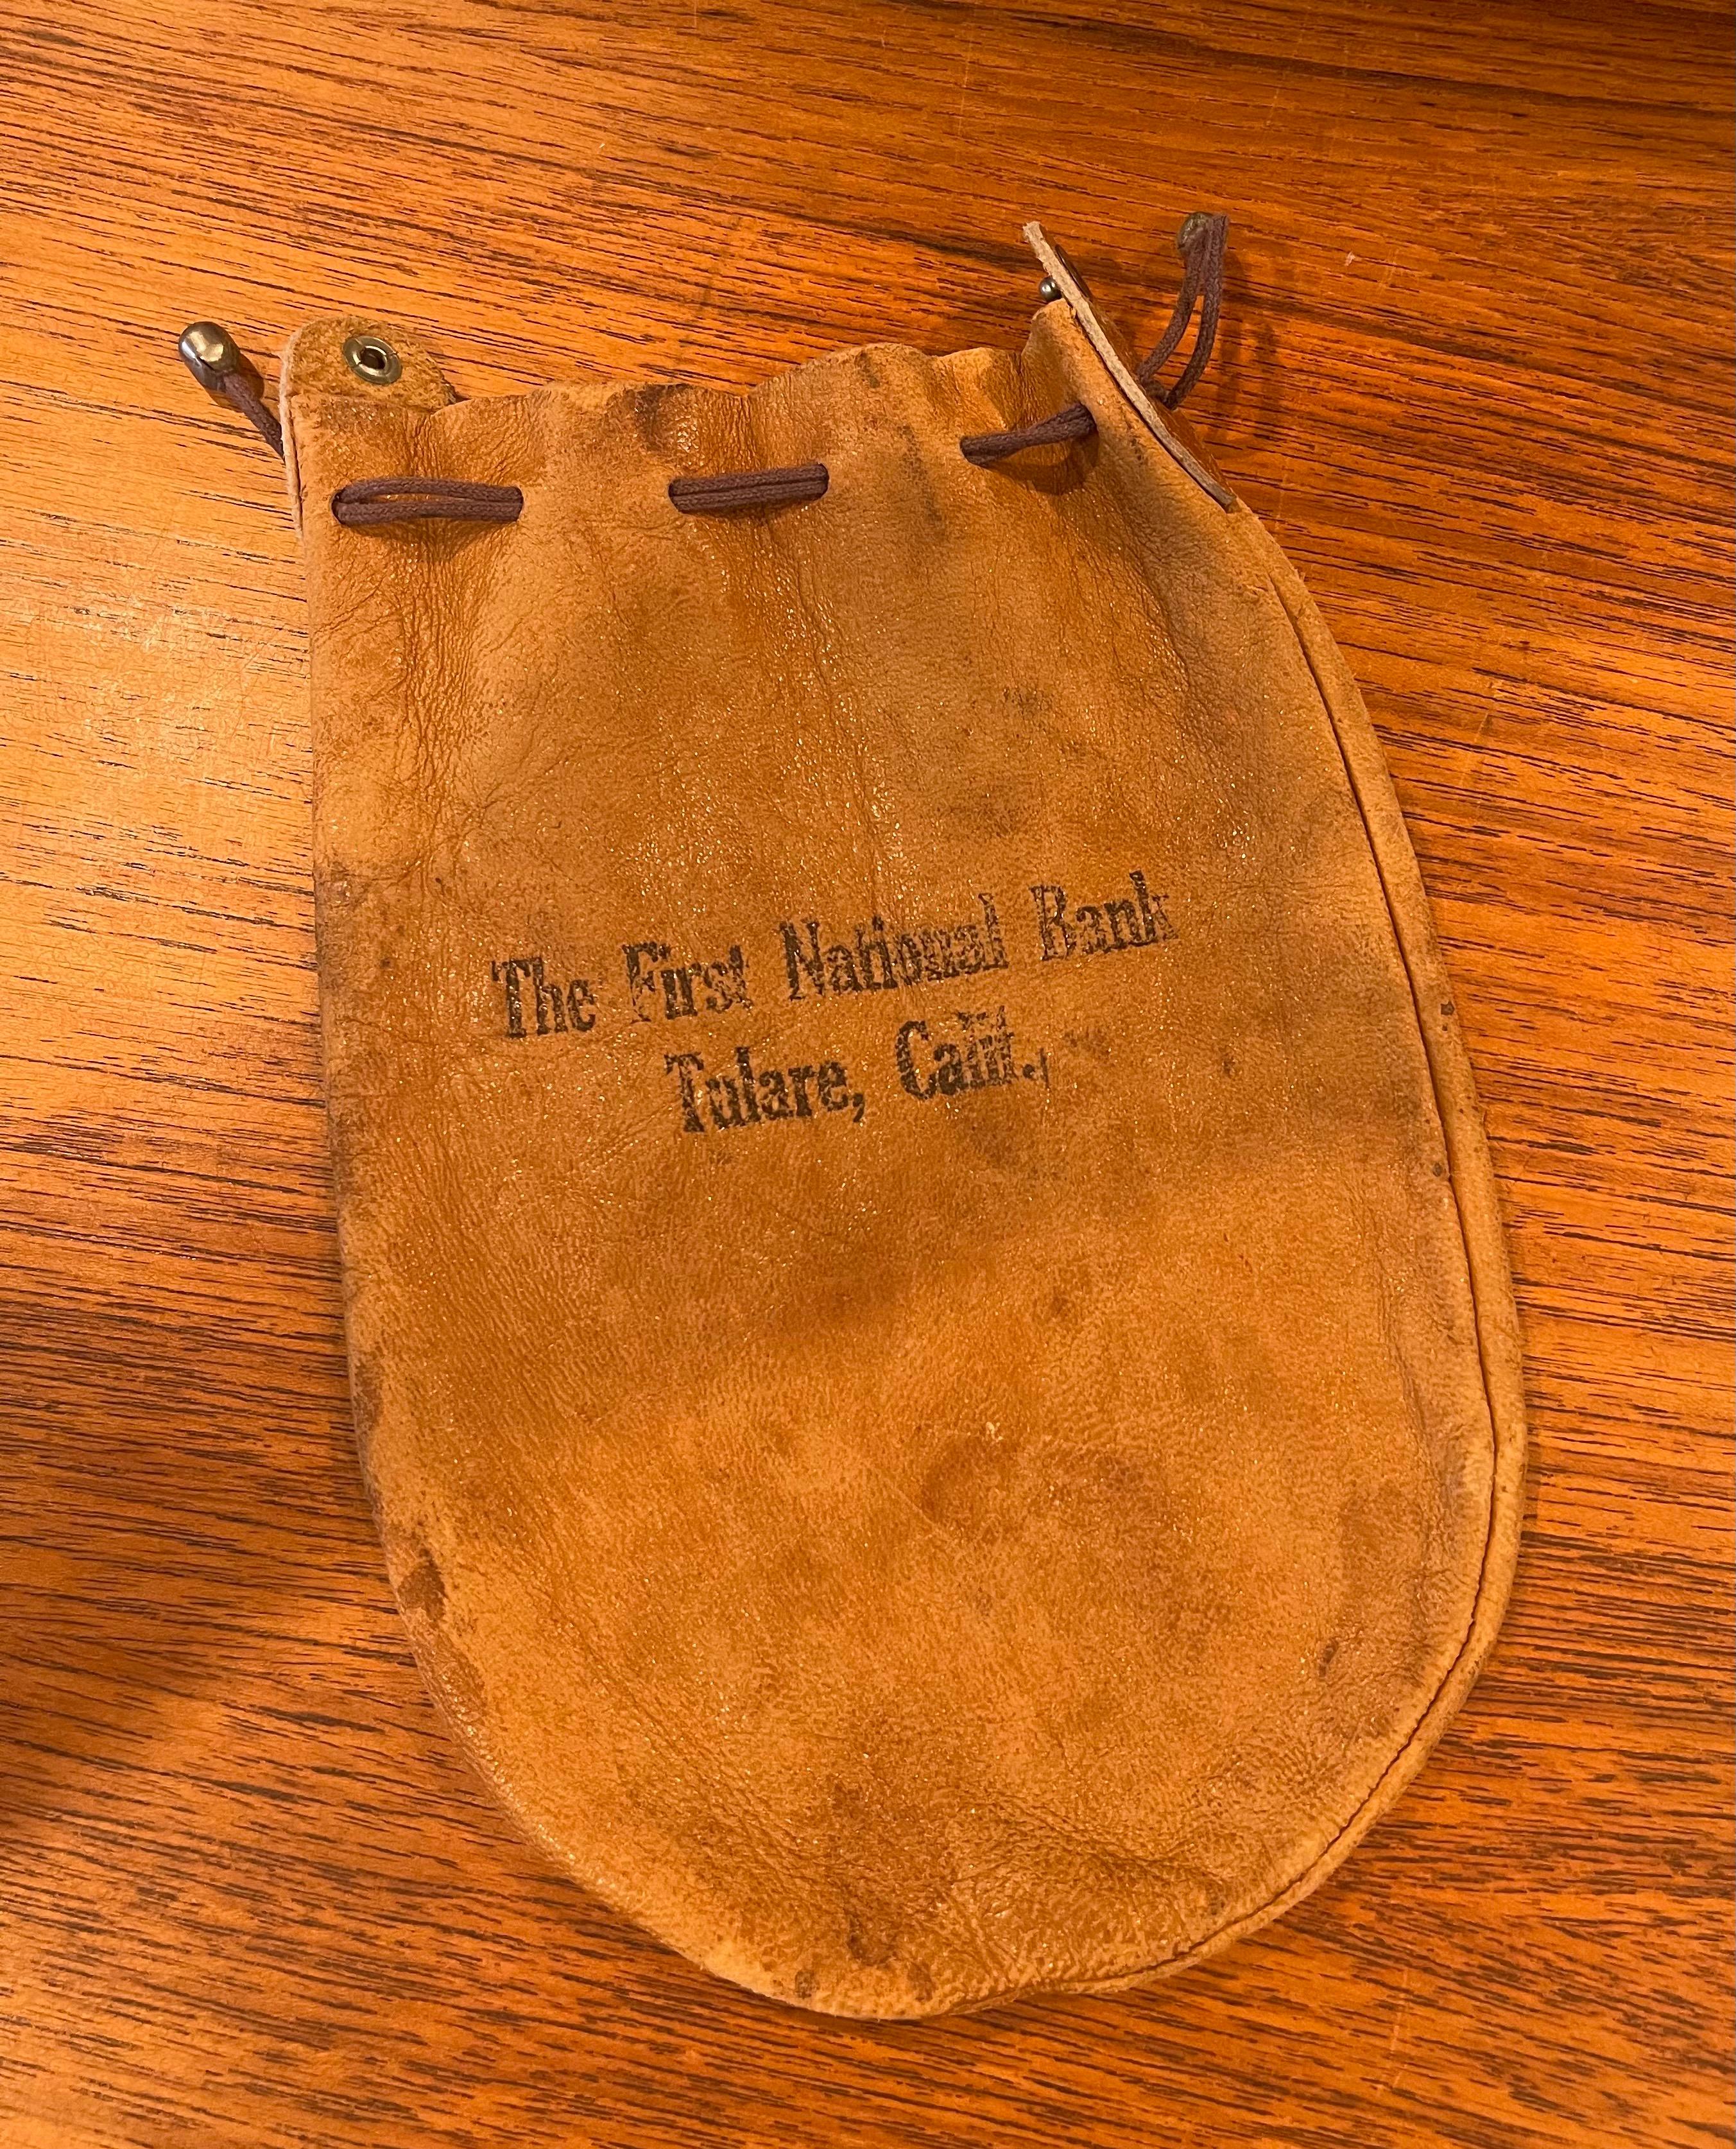 Vintage leather bank / money bag from The First National Bank- Tulare, Calif., circa 1930s. The bag is in very good vintage condition and measures 6